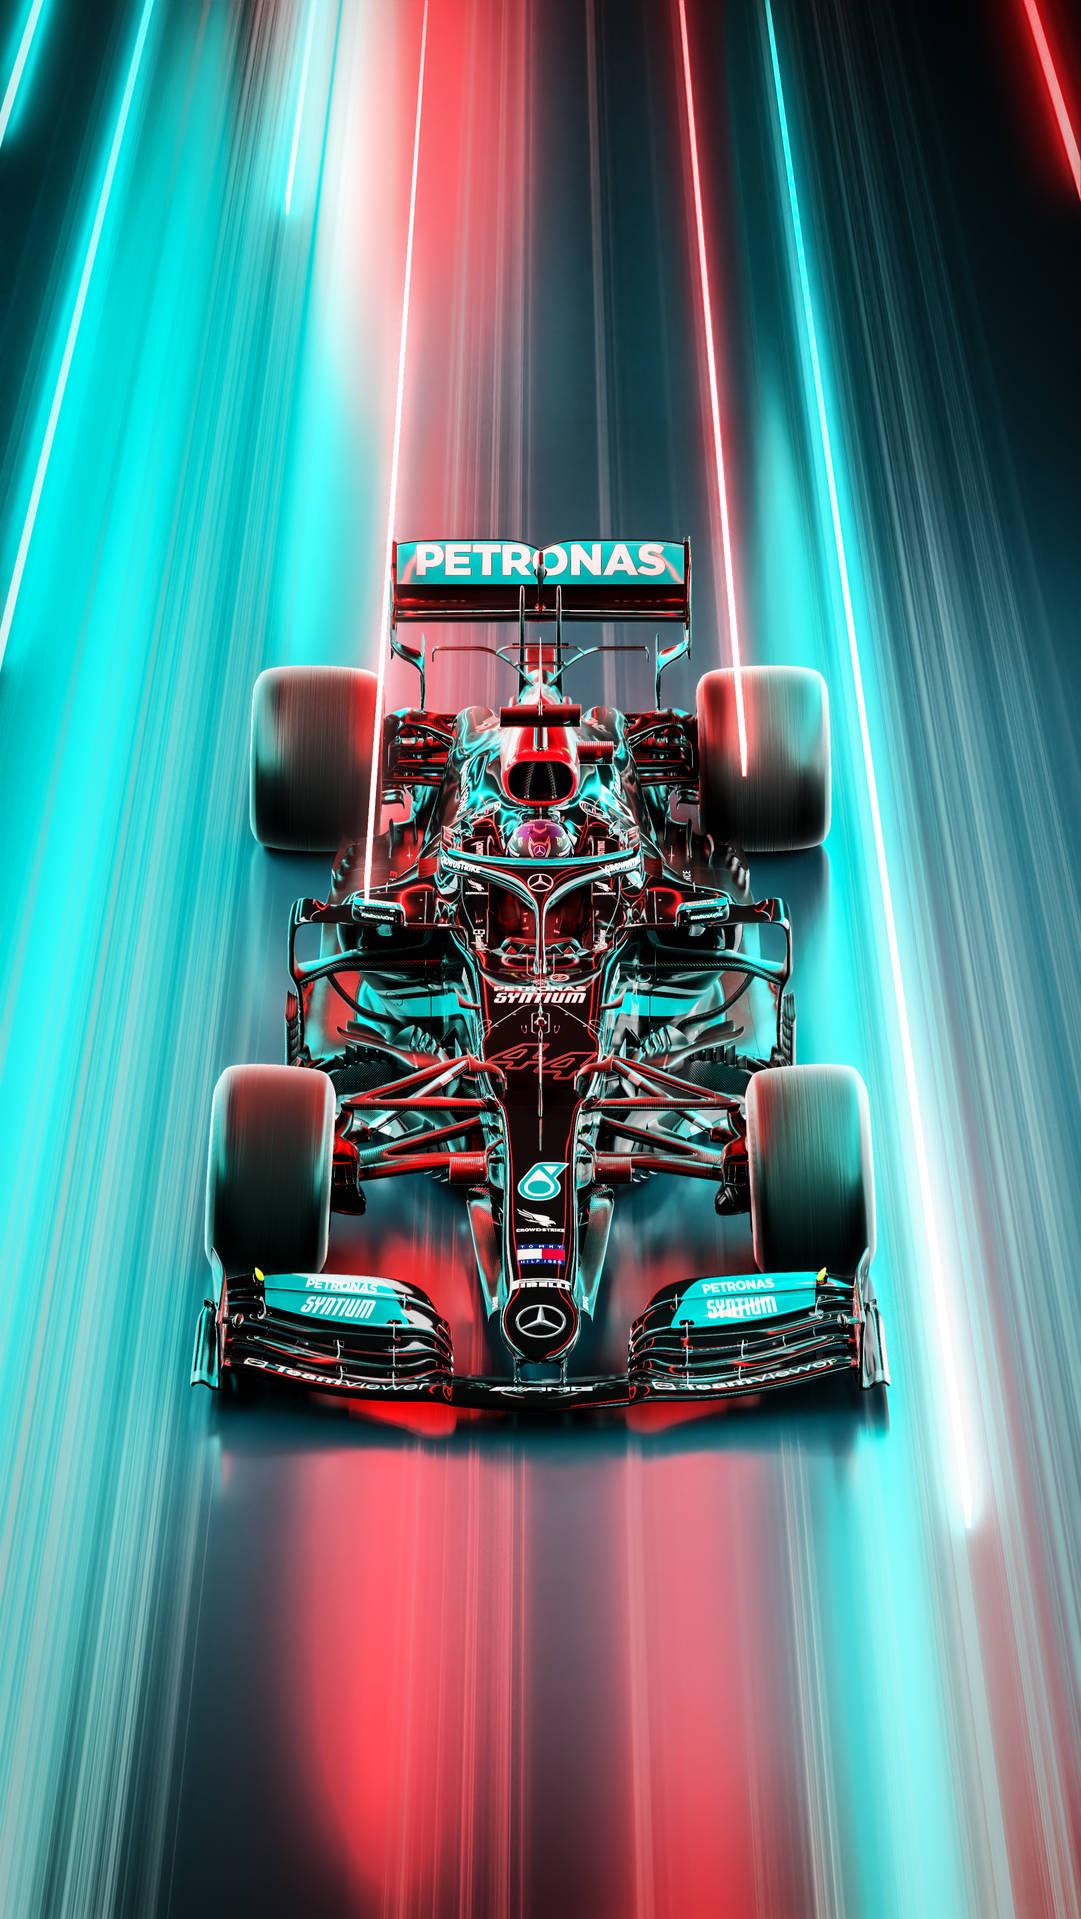 Download wallpaper 840x1336 ferrari sf71h formula one f1 sports cars  2018 iphone 5 iphone 5s iphone 5c ipod touch 840x1336 hd background  3788